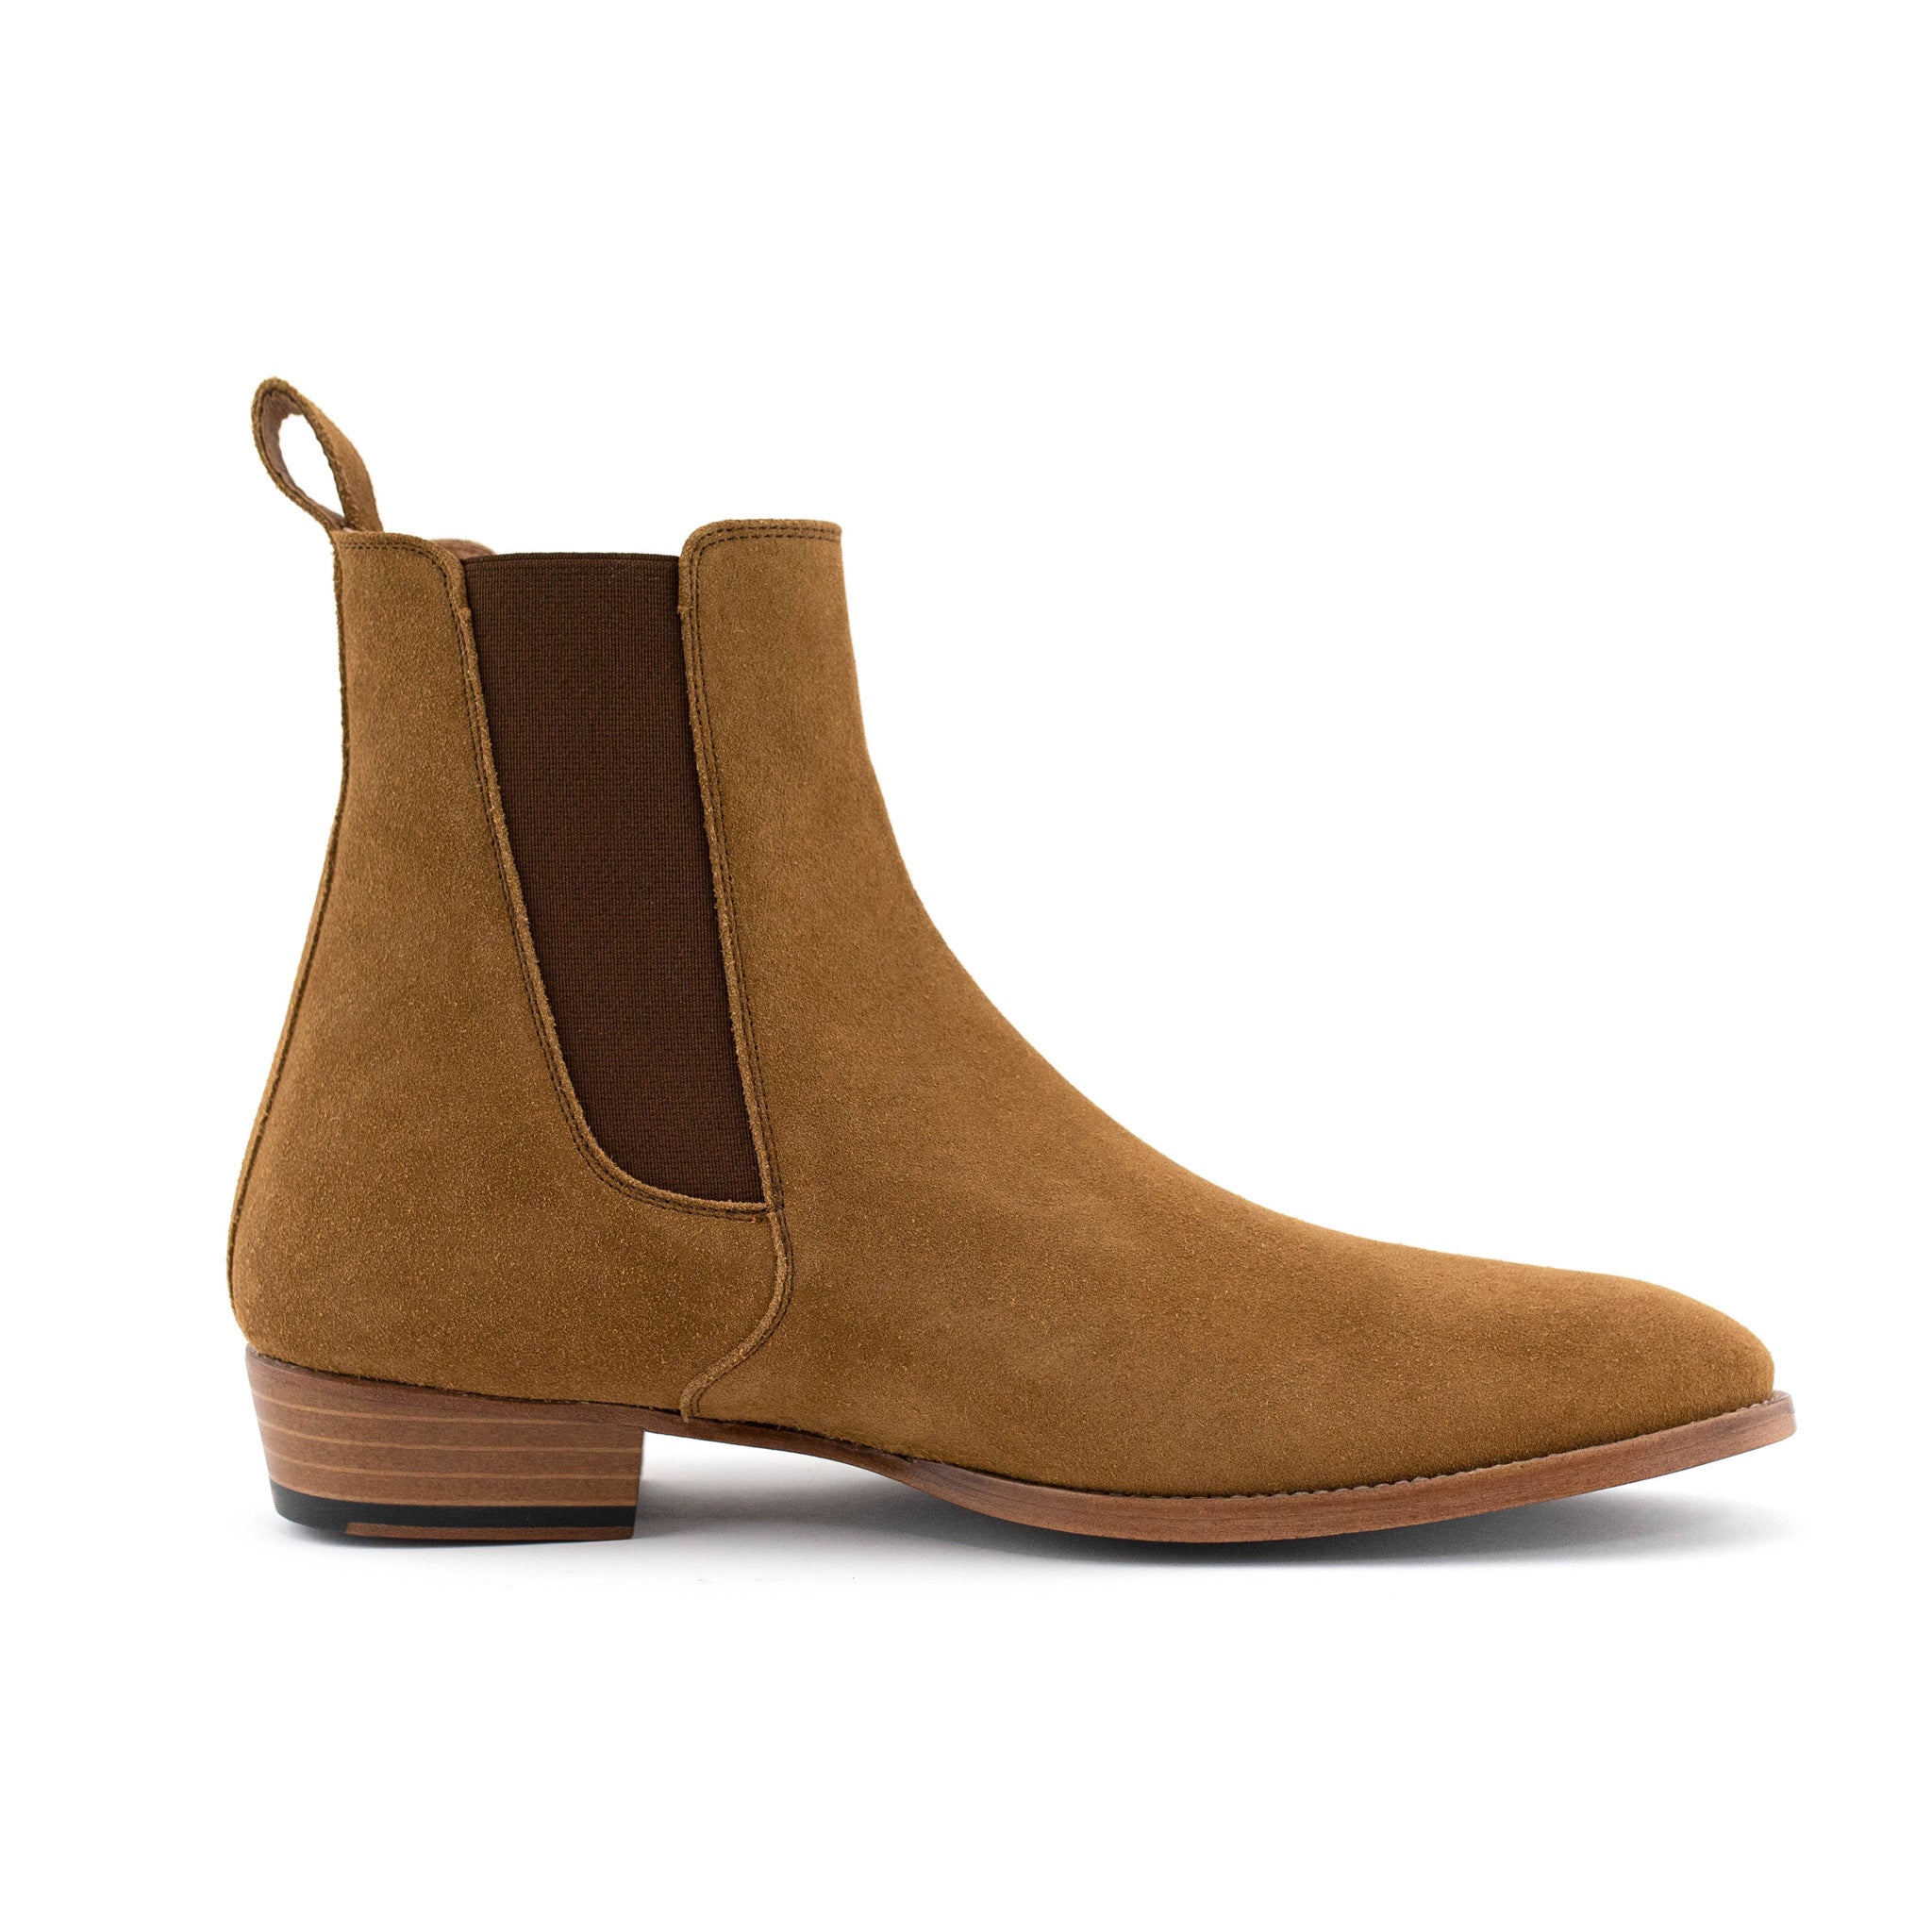 Formand Forladt peddling THE DAMIAN GRANADA CHELSEA BOOTS | ORO Los Angeles